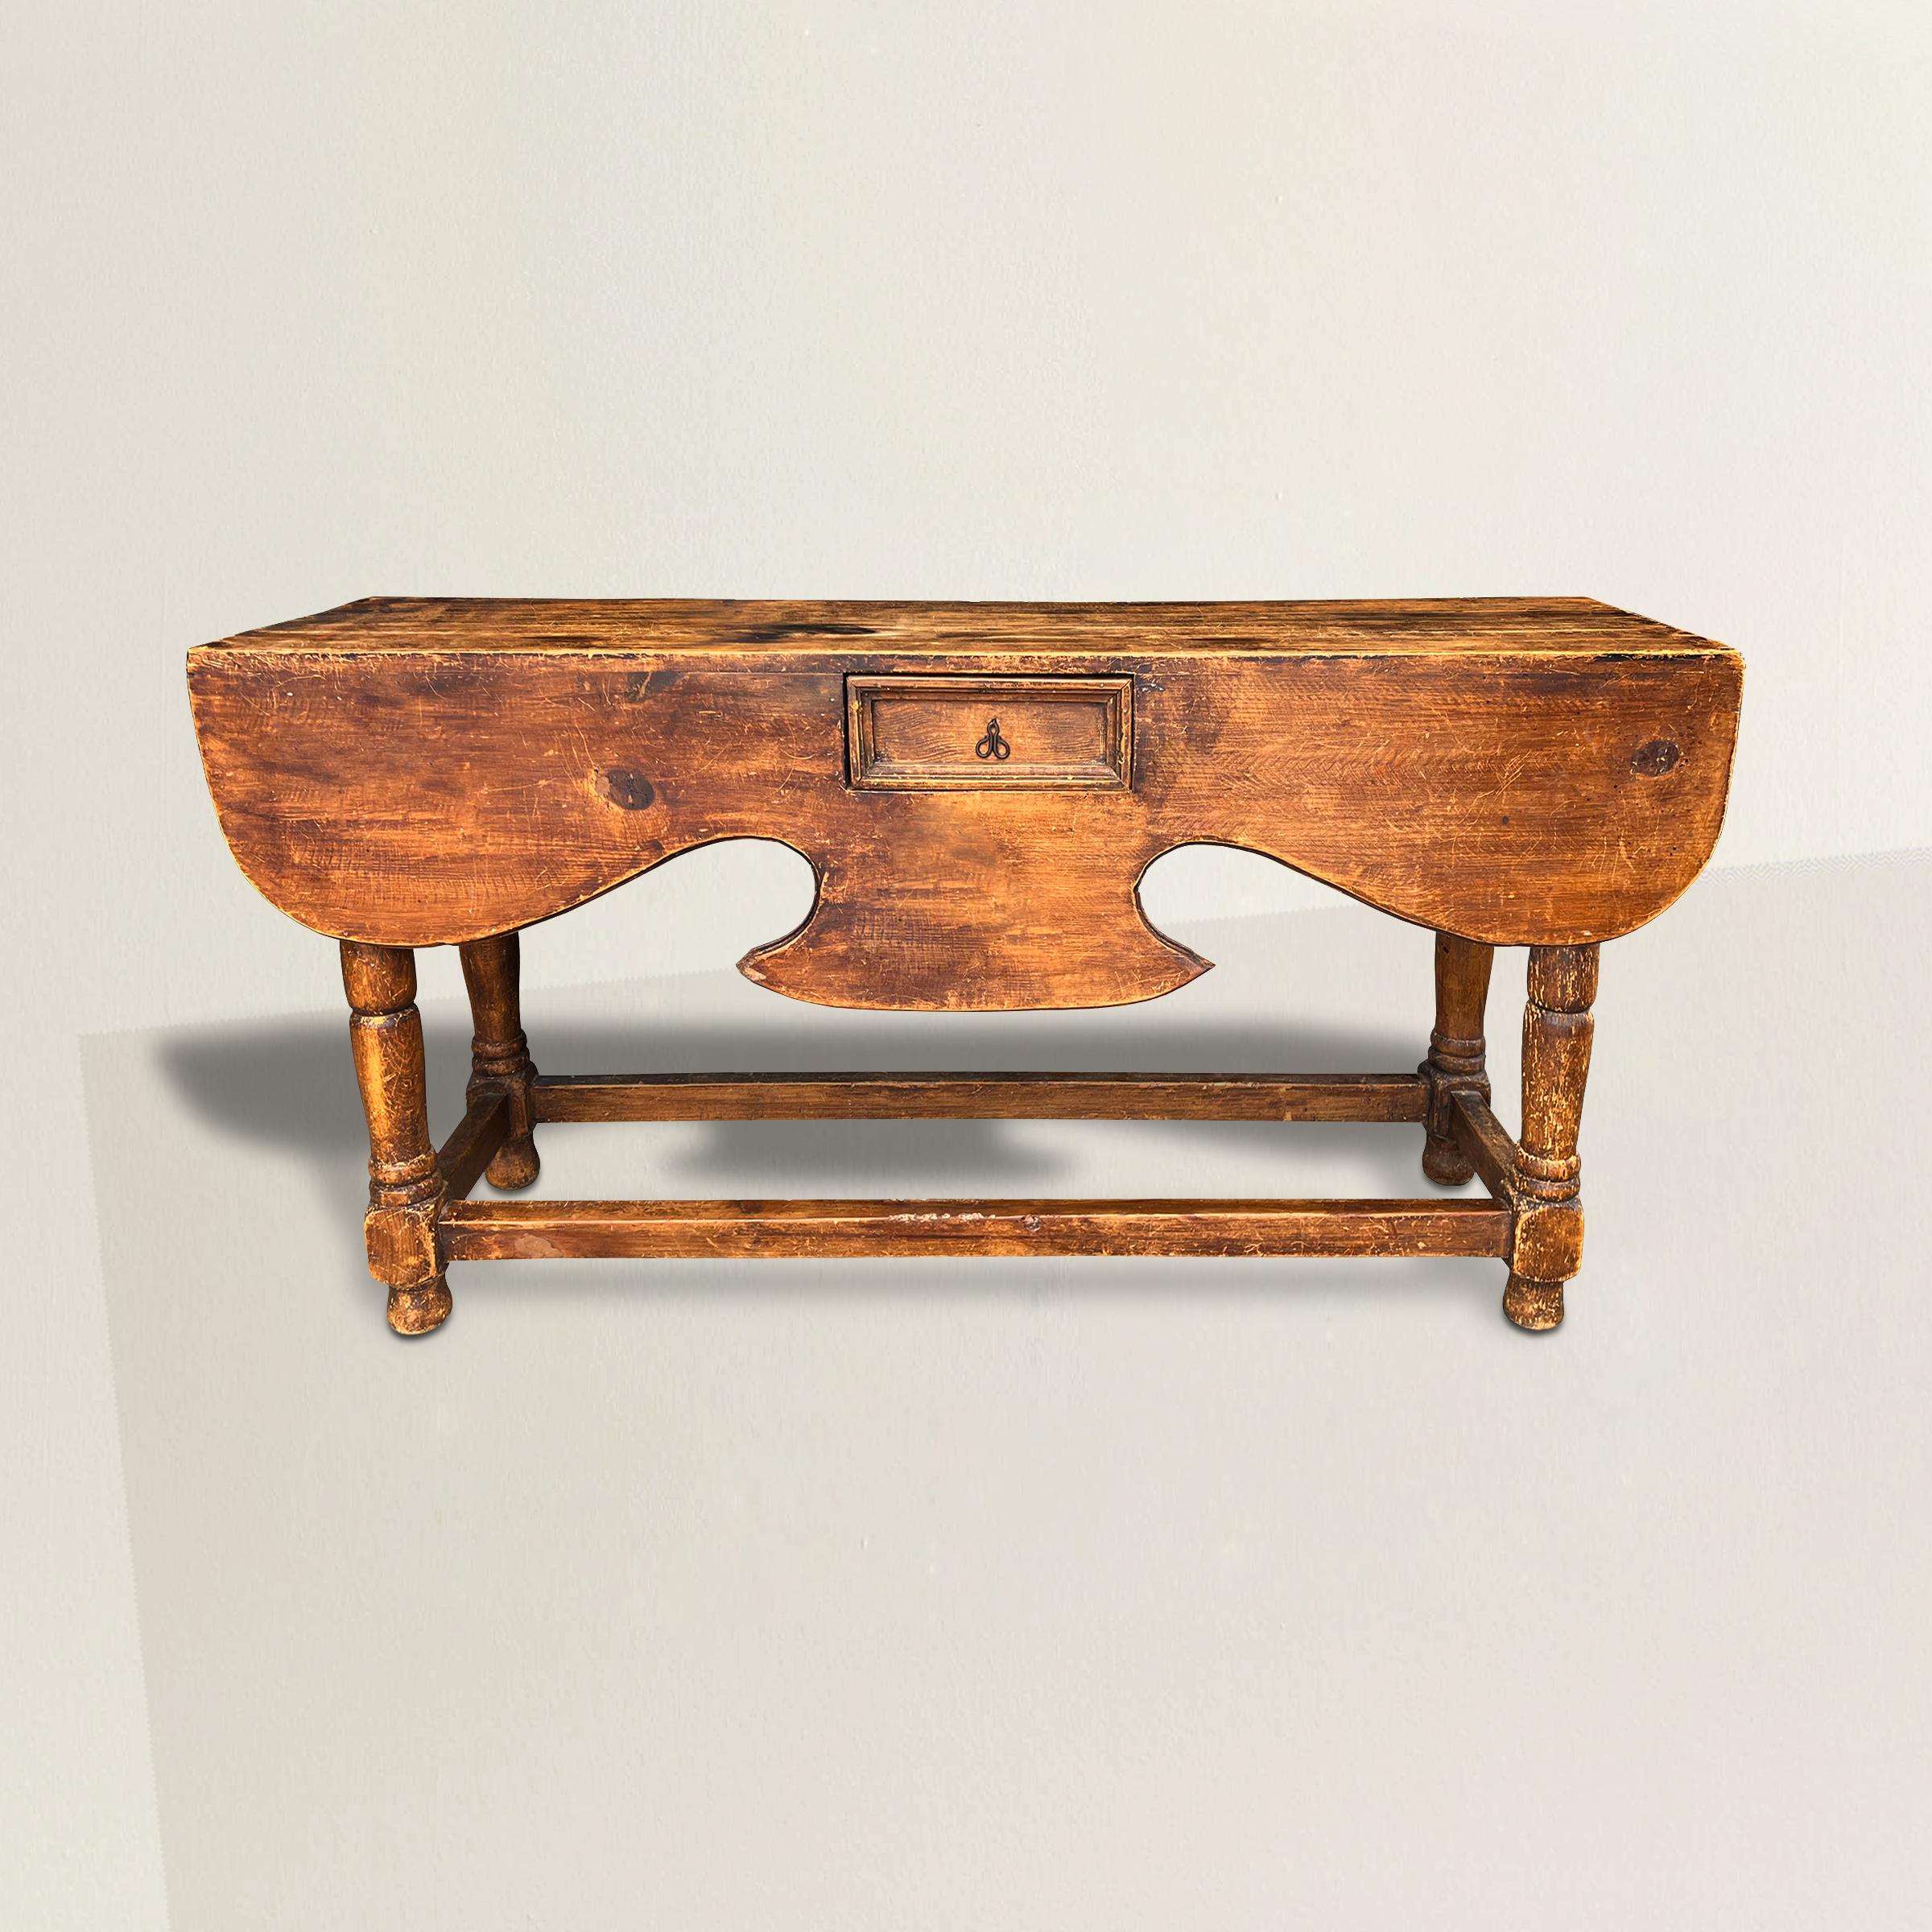 A bold and playful early 20th century Mexican Spanish colonial console table with a wide sculptural apron with one drawer, and supported by turned legs with stretchers. The perfect console in your entry way or behind a sofa, or used as a sideboard